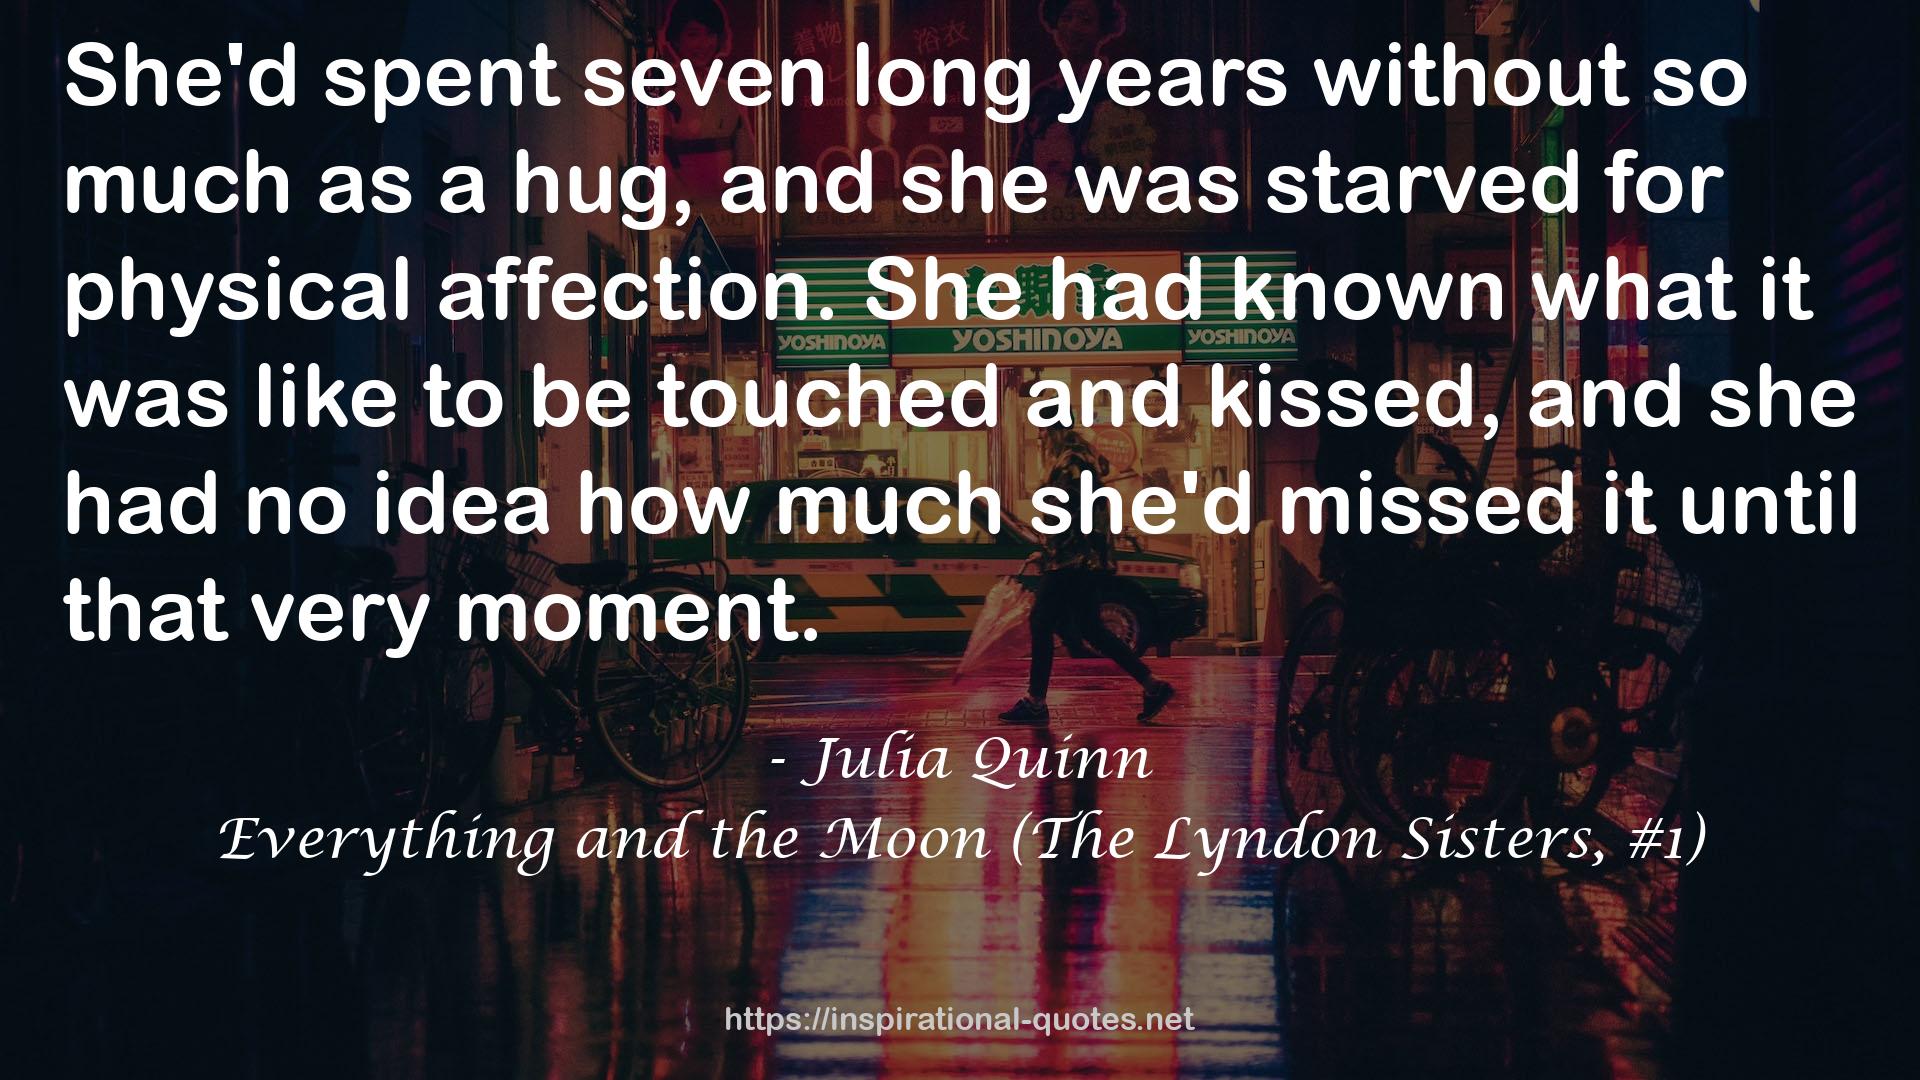 Everything and the Moon (The Lyndon Sisters, #1) QUOTES